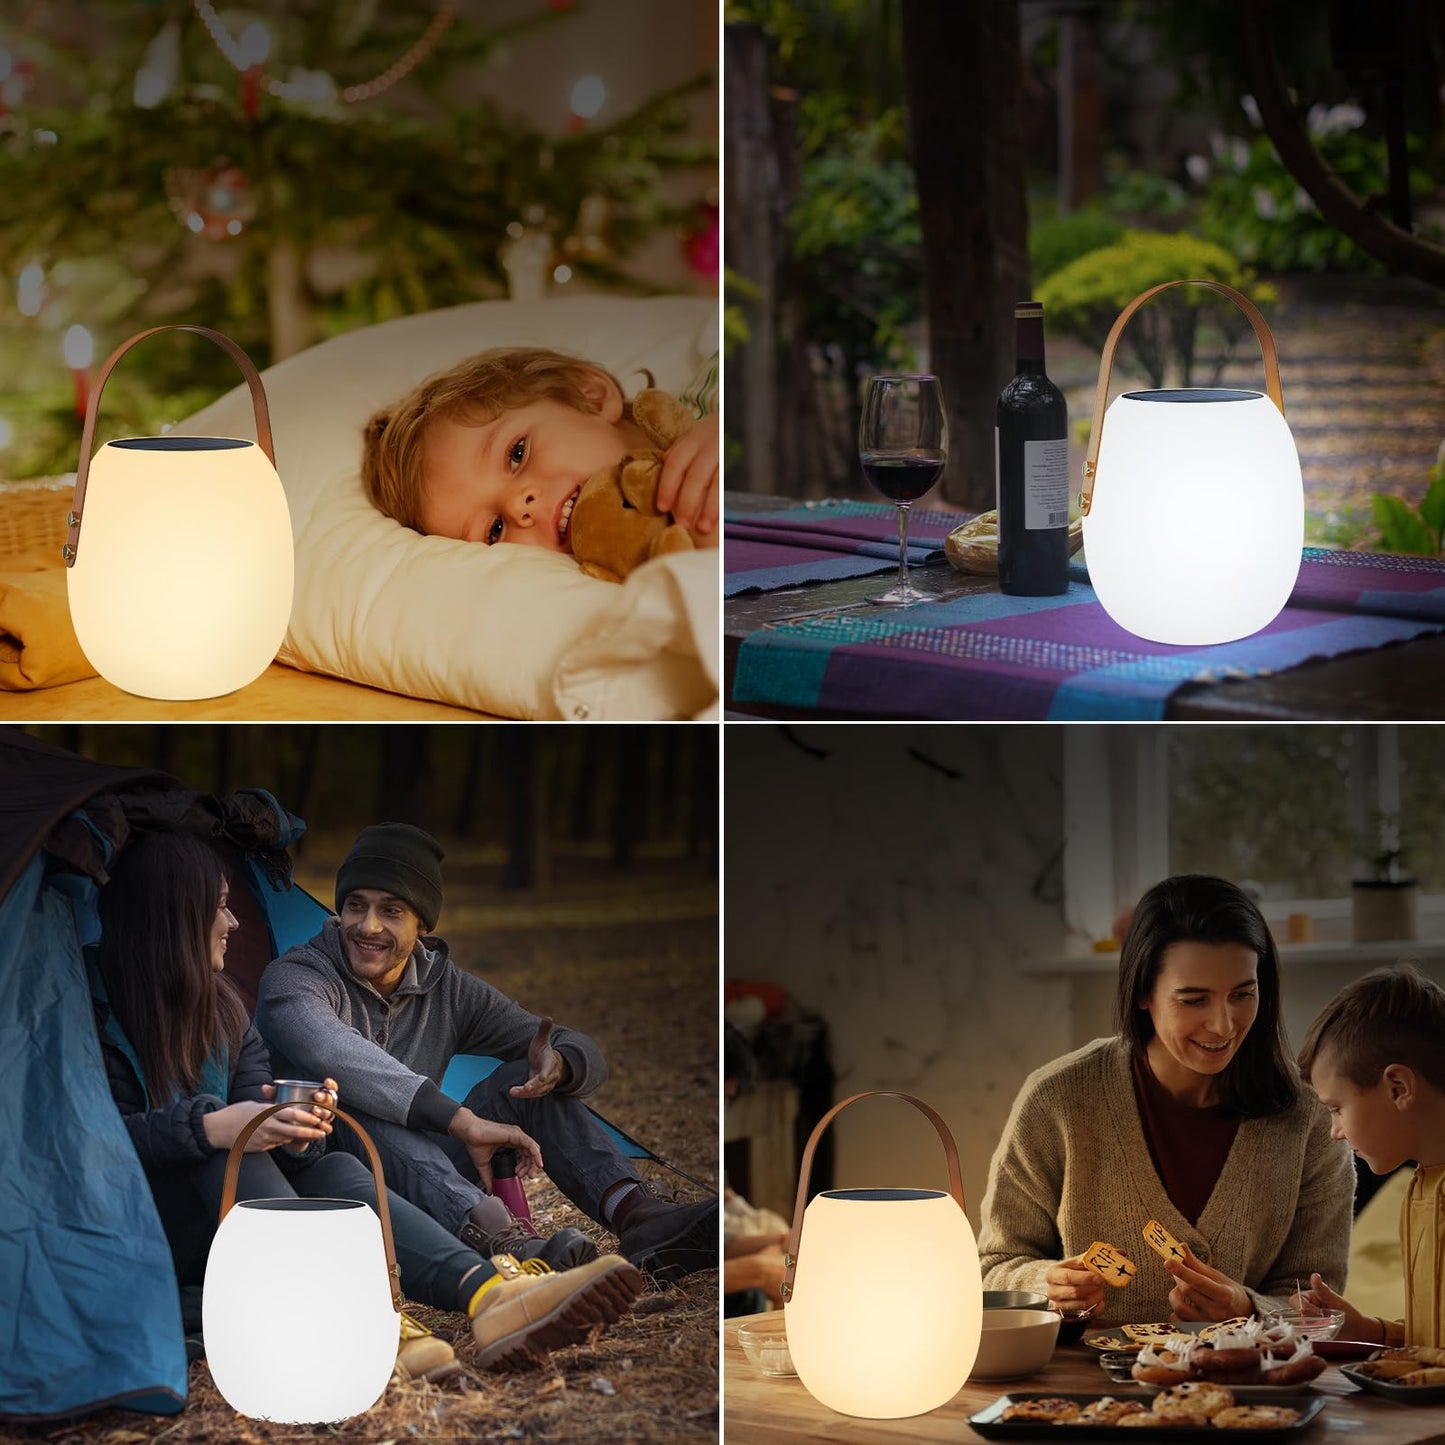 Outdoor Lanterns for Patio Waterproof for 1800mAh Battery Lantern with Solar Lanterns Outdoor DC-USB Rechargeable, Warm White+ Cool White, for Outside/Indoor Camping Garden Yard